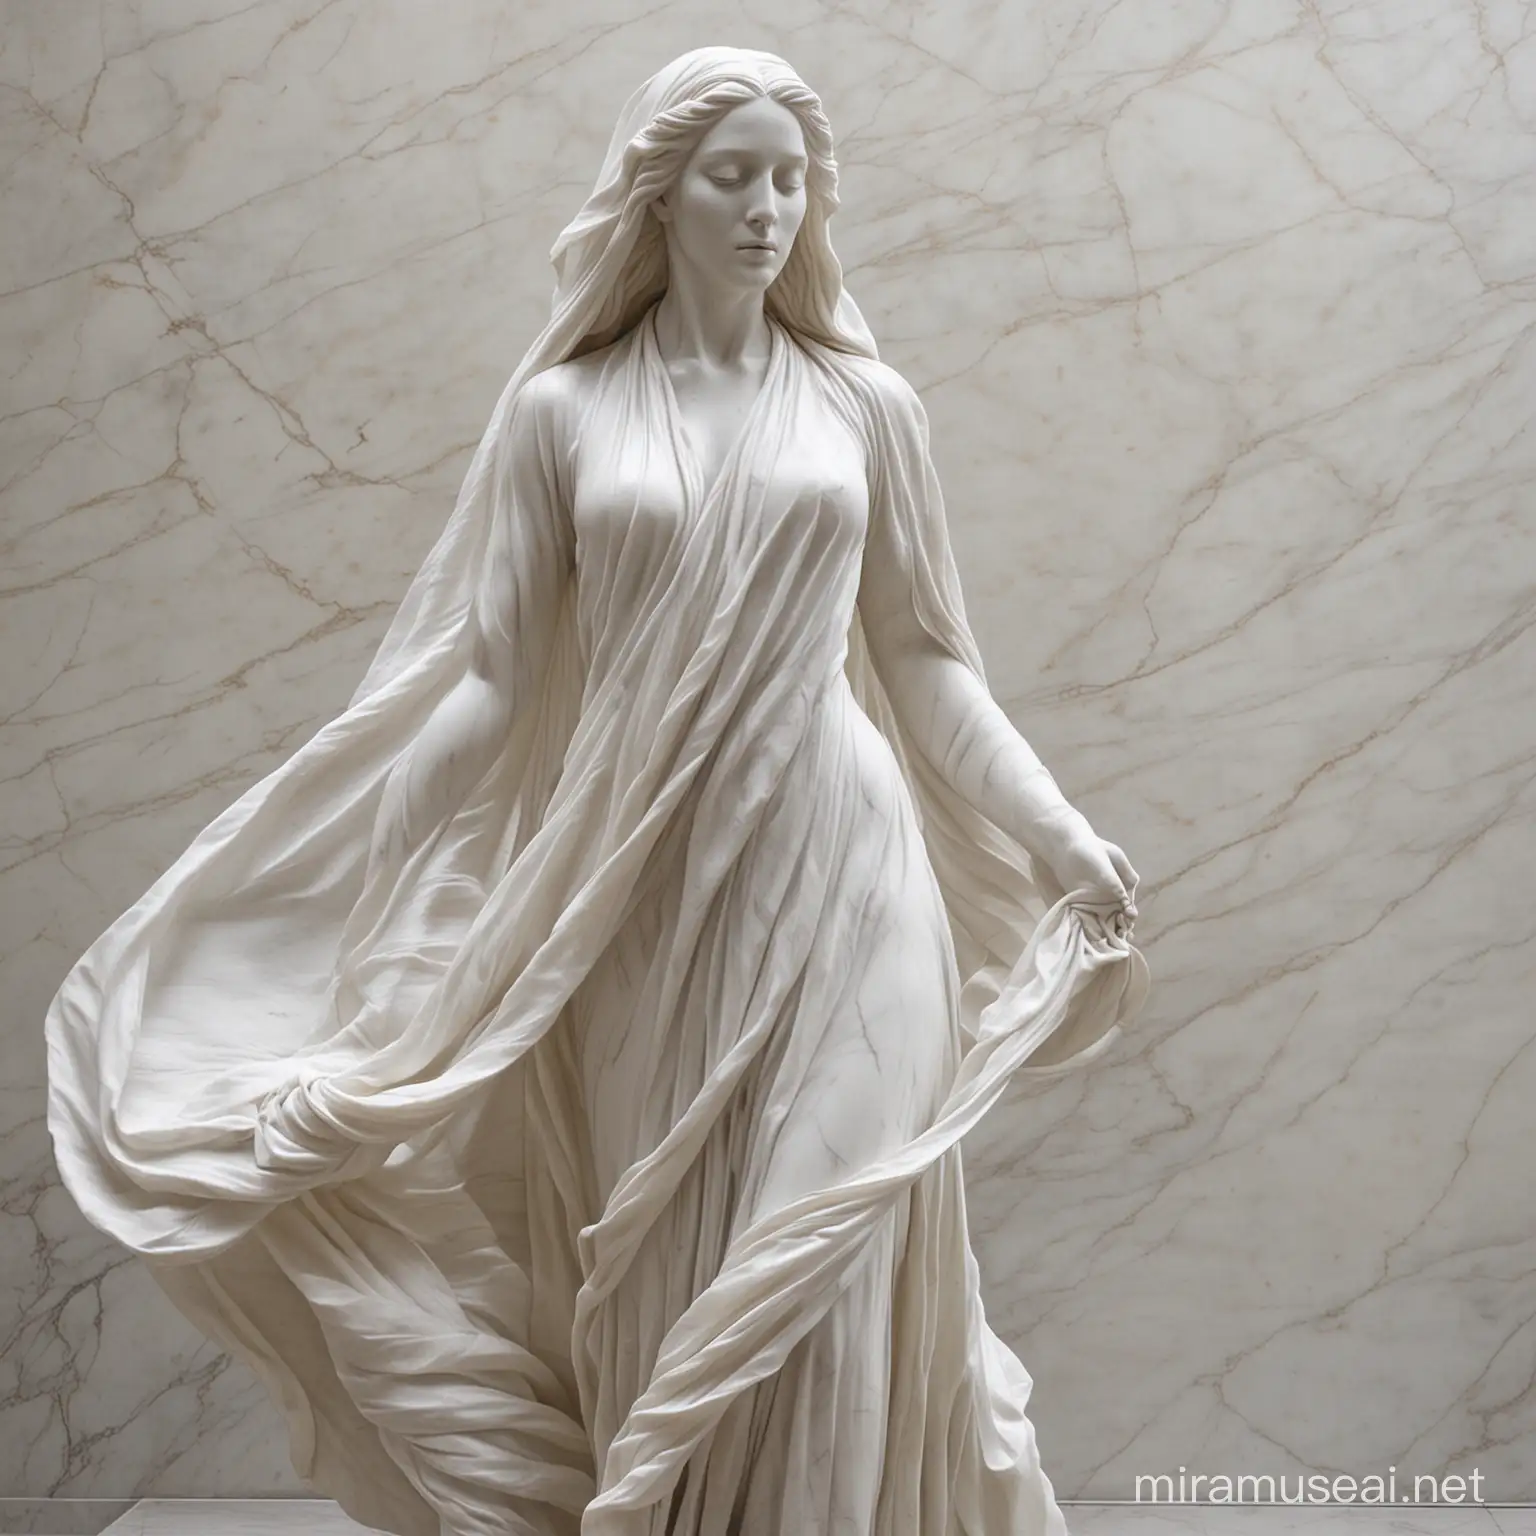 Ethereal White Marble Sculpture of Veiled Woman in Wind